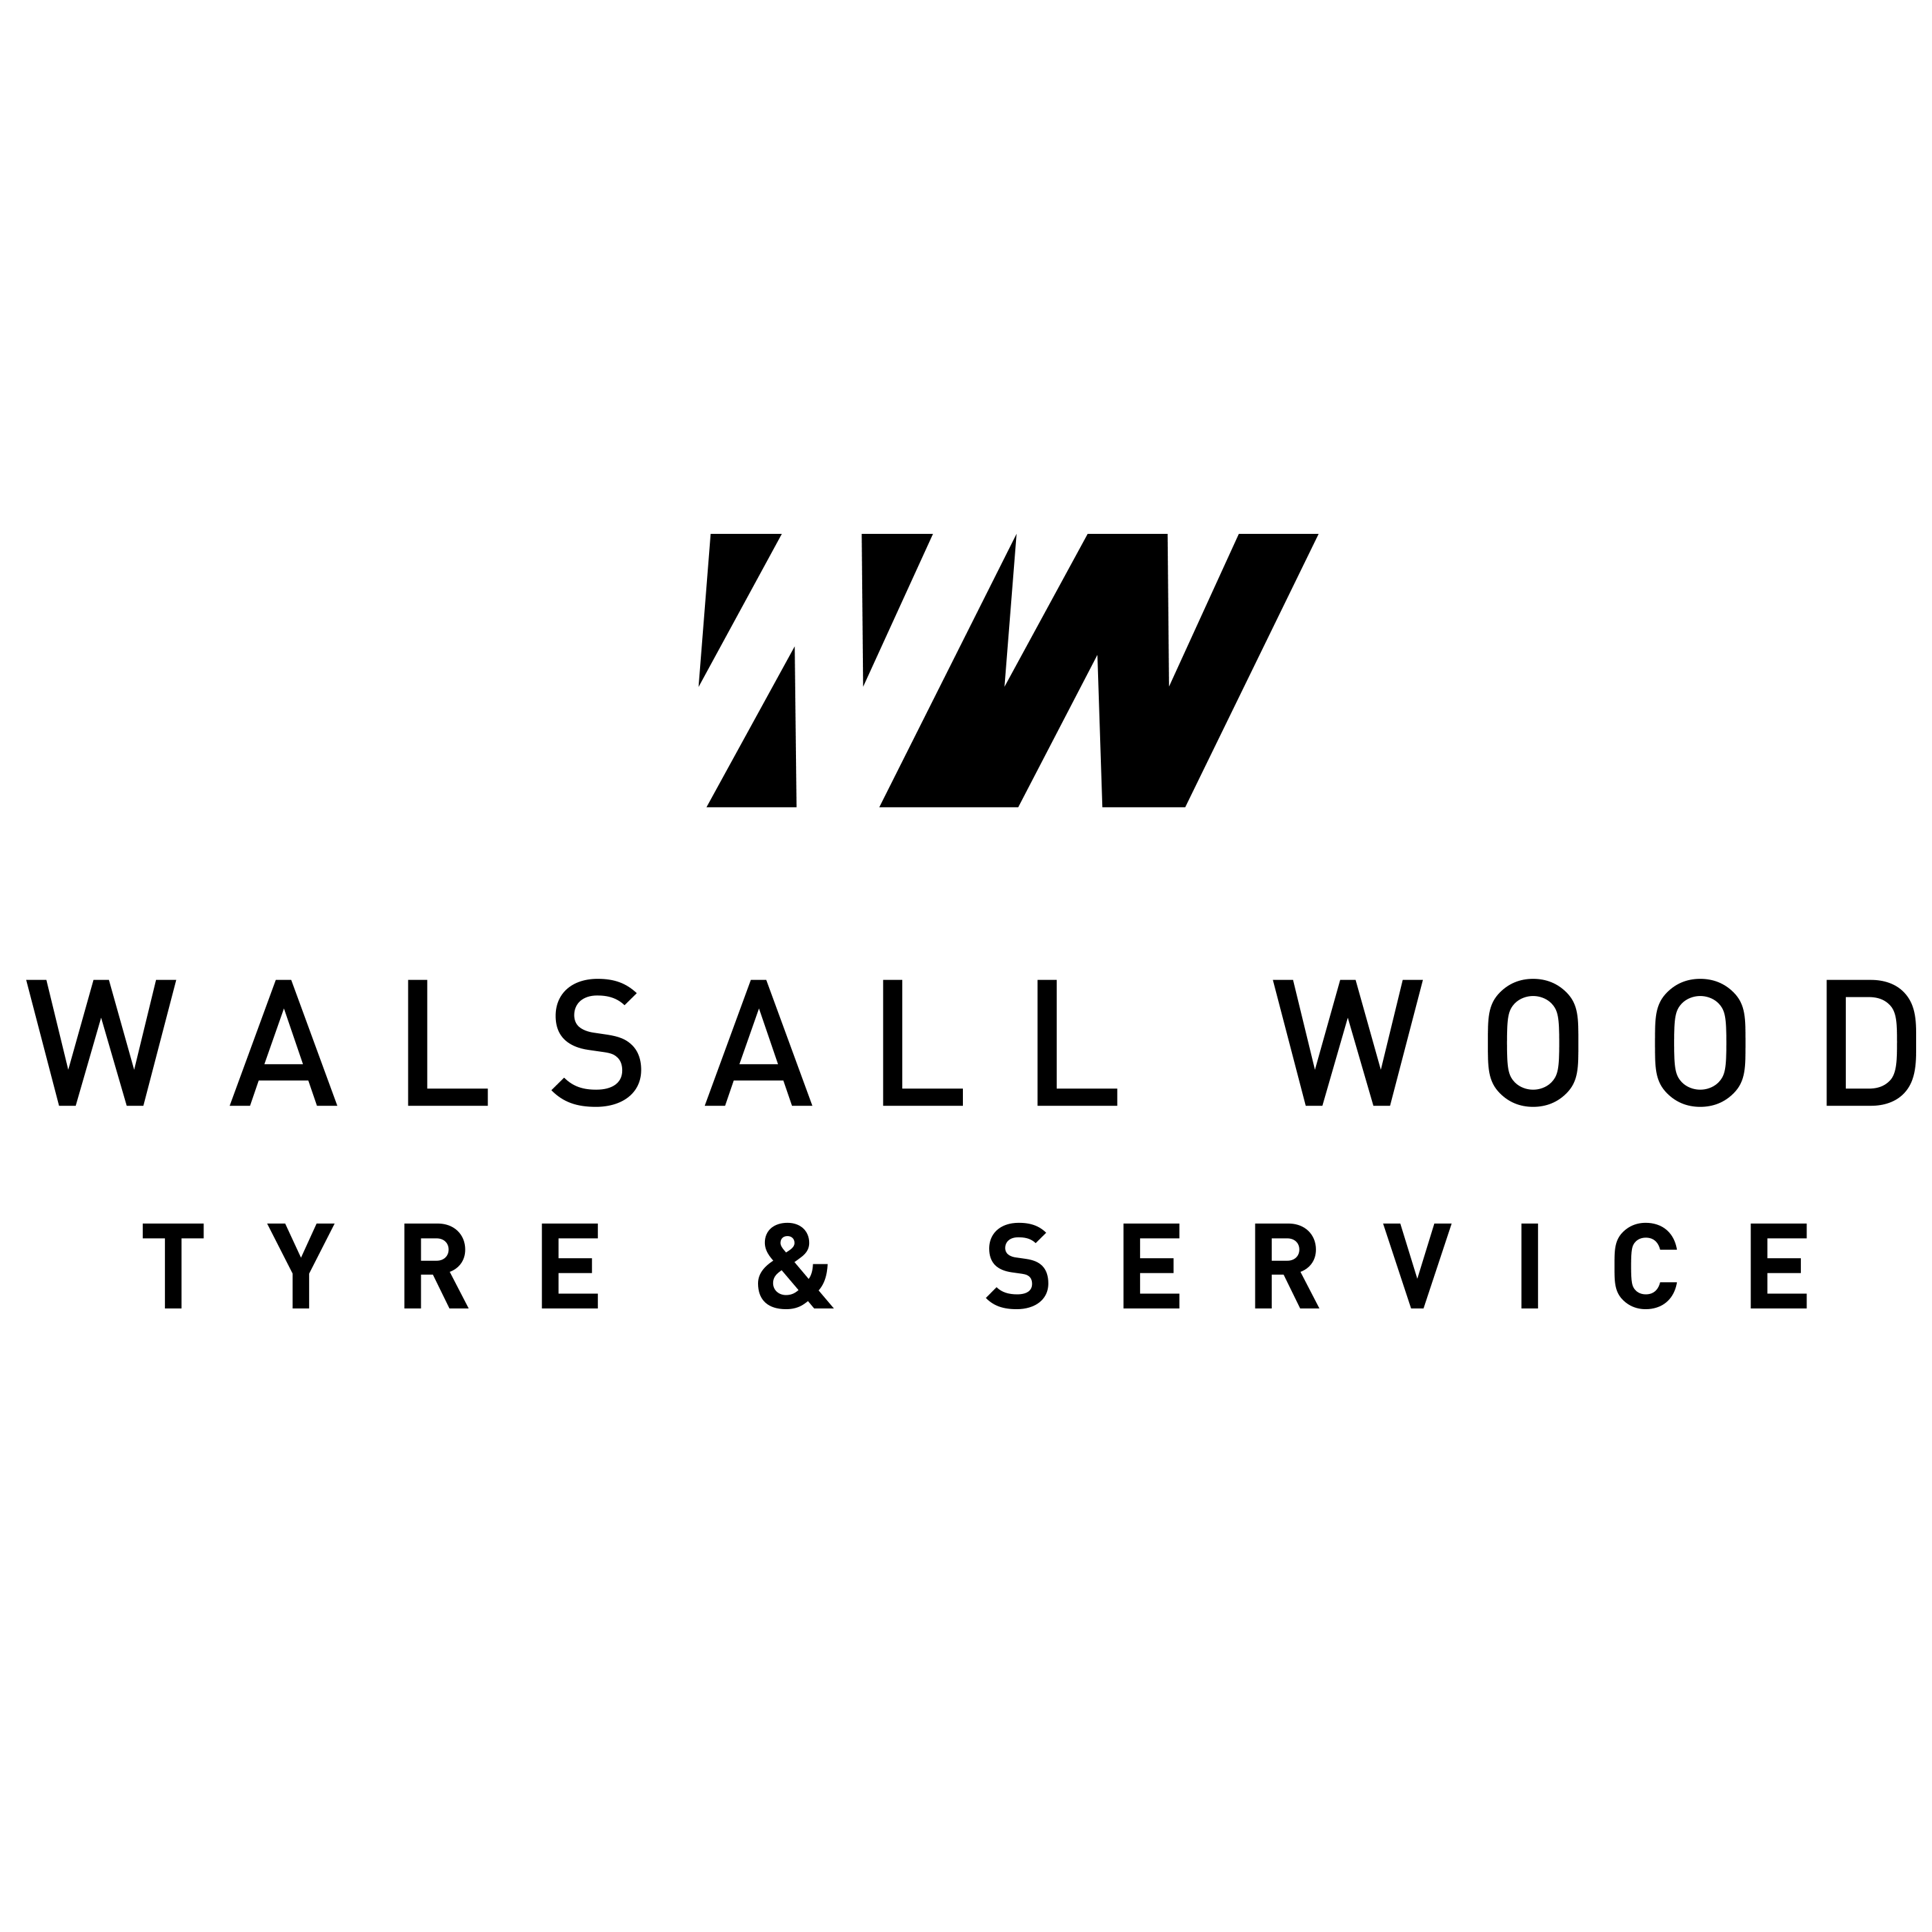 Walsall Wood Tyre & Service Ltd - Walsall, West Midlands WS9 9AS - 01543 454644 | ShowMeLocal.com